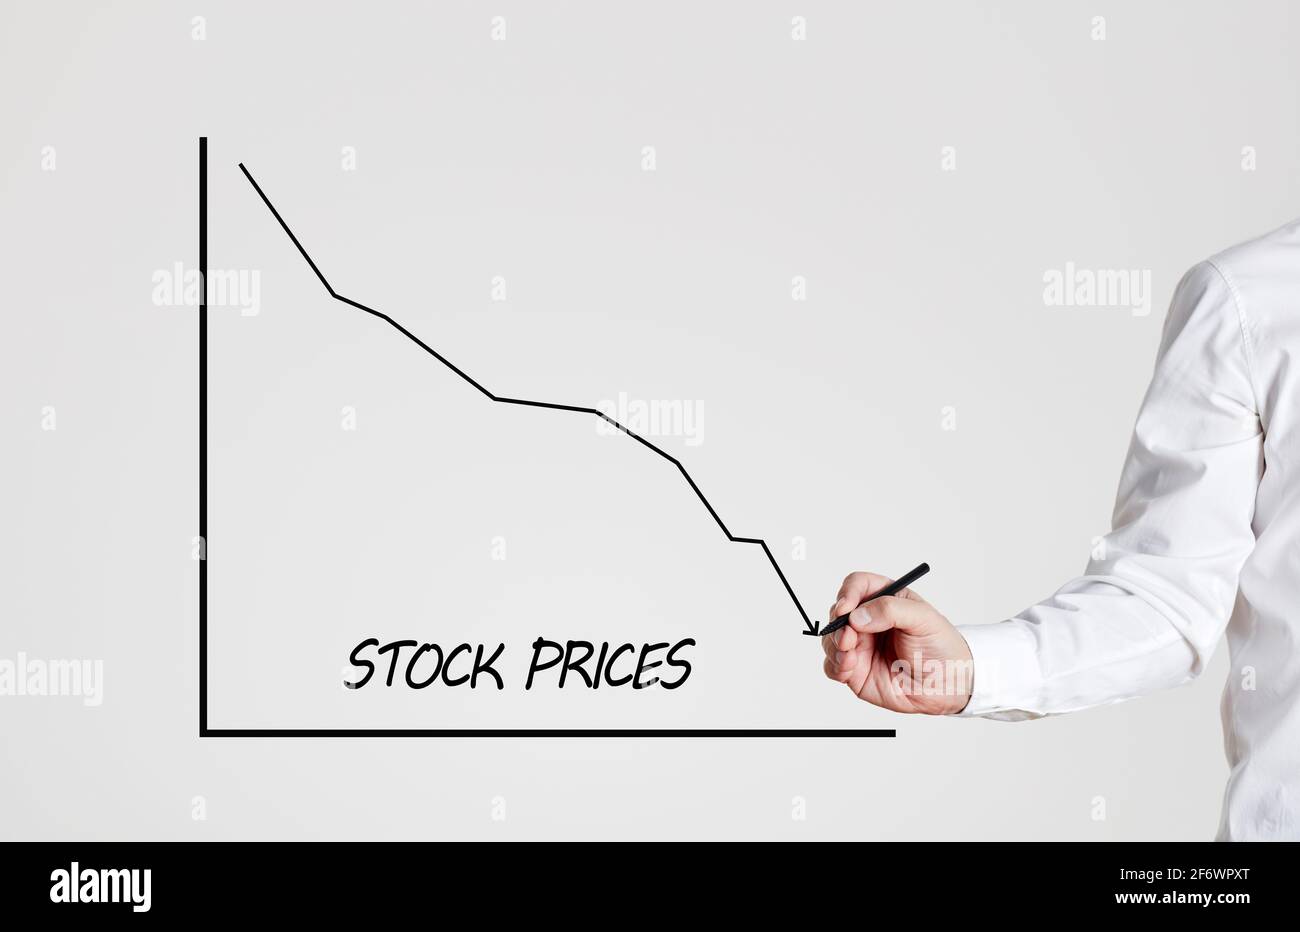 Businessman draws a declining line graph with the word stock prices. Economic crisis and falling stock market prices concept. Stock Photo